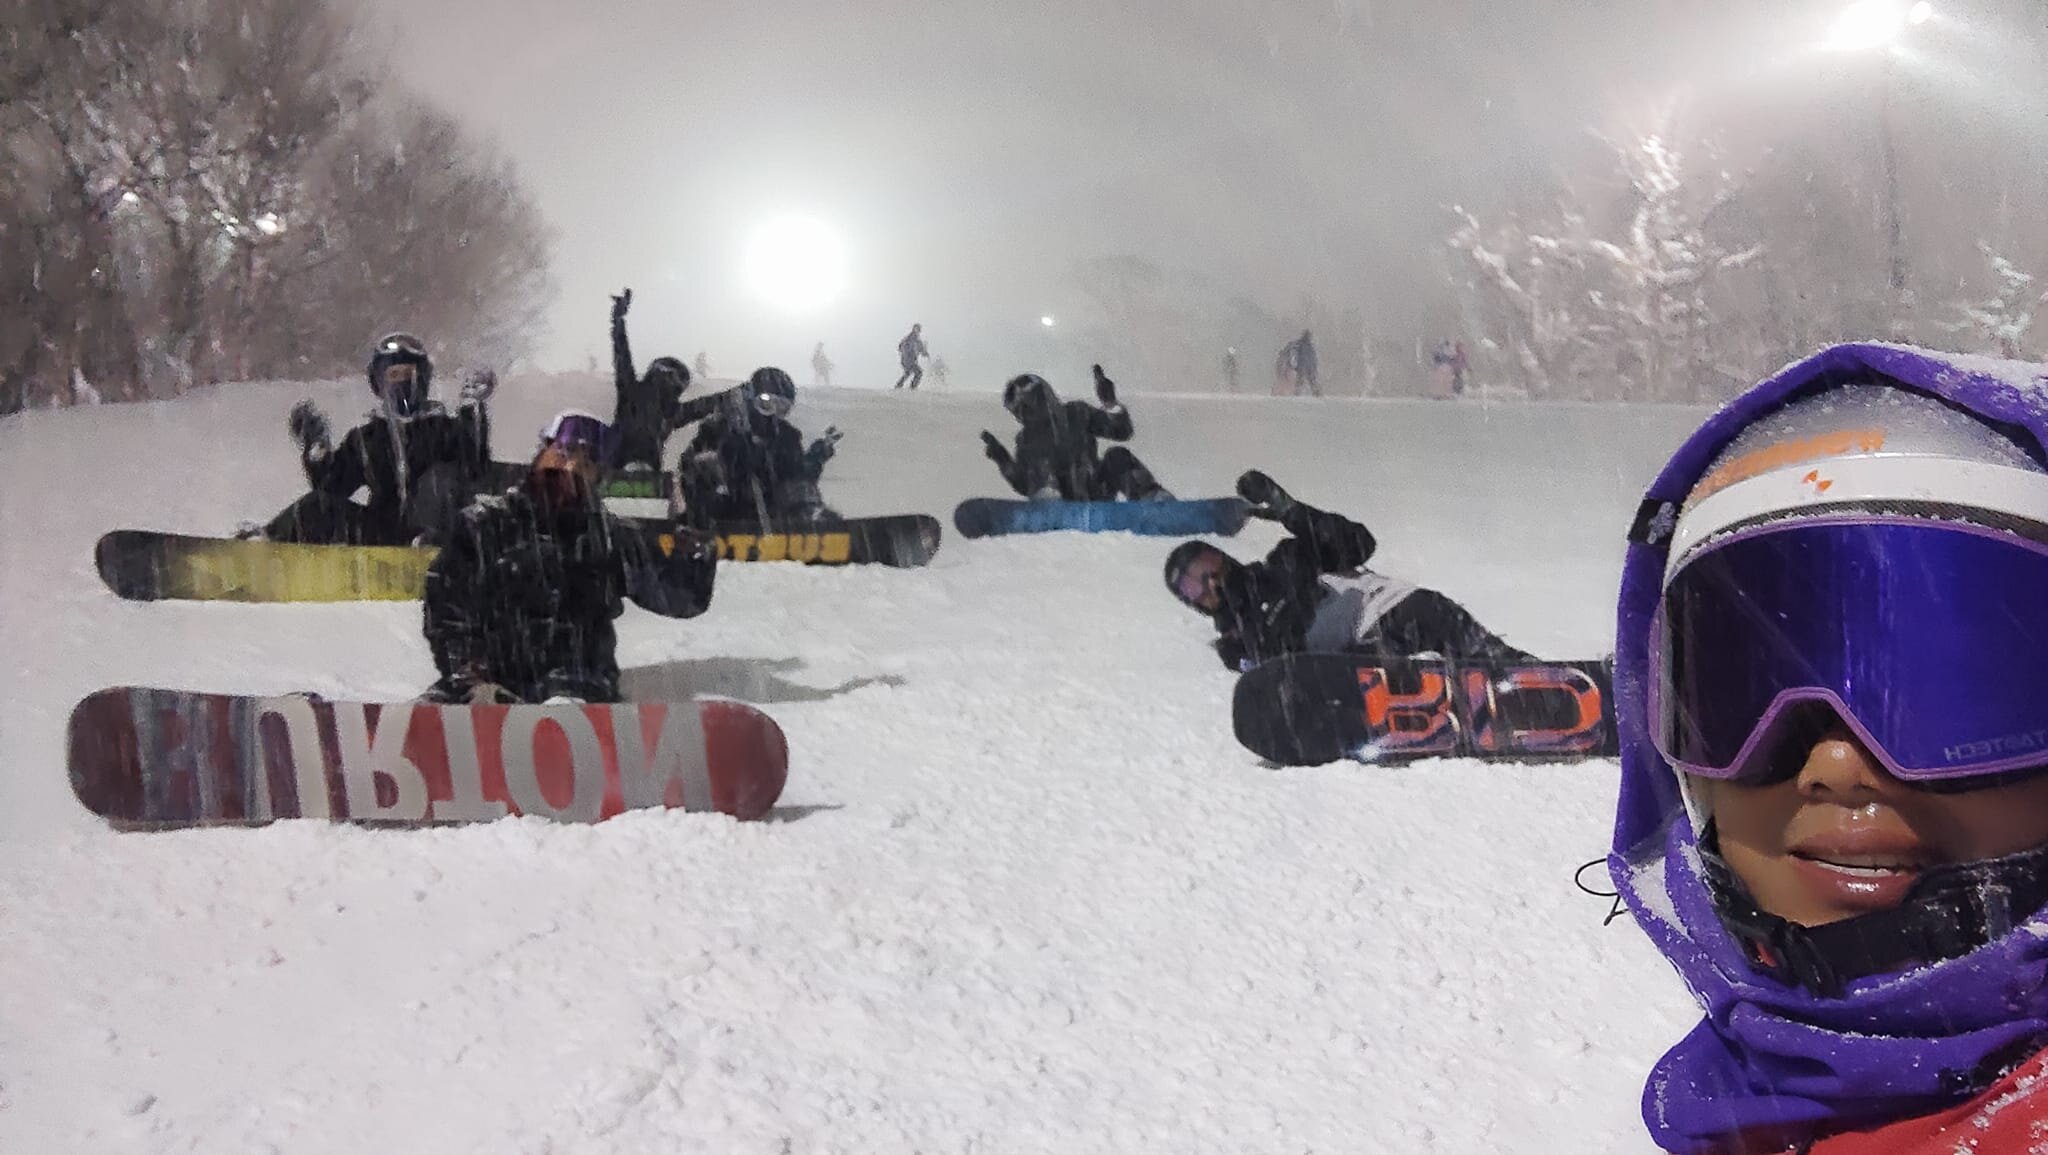 Finally squeezed in some free time to ride with friends during the night with non-stop dumping! 

#japanpow #niseko